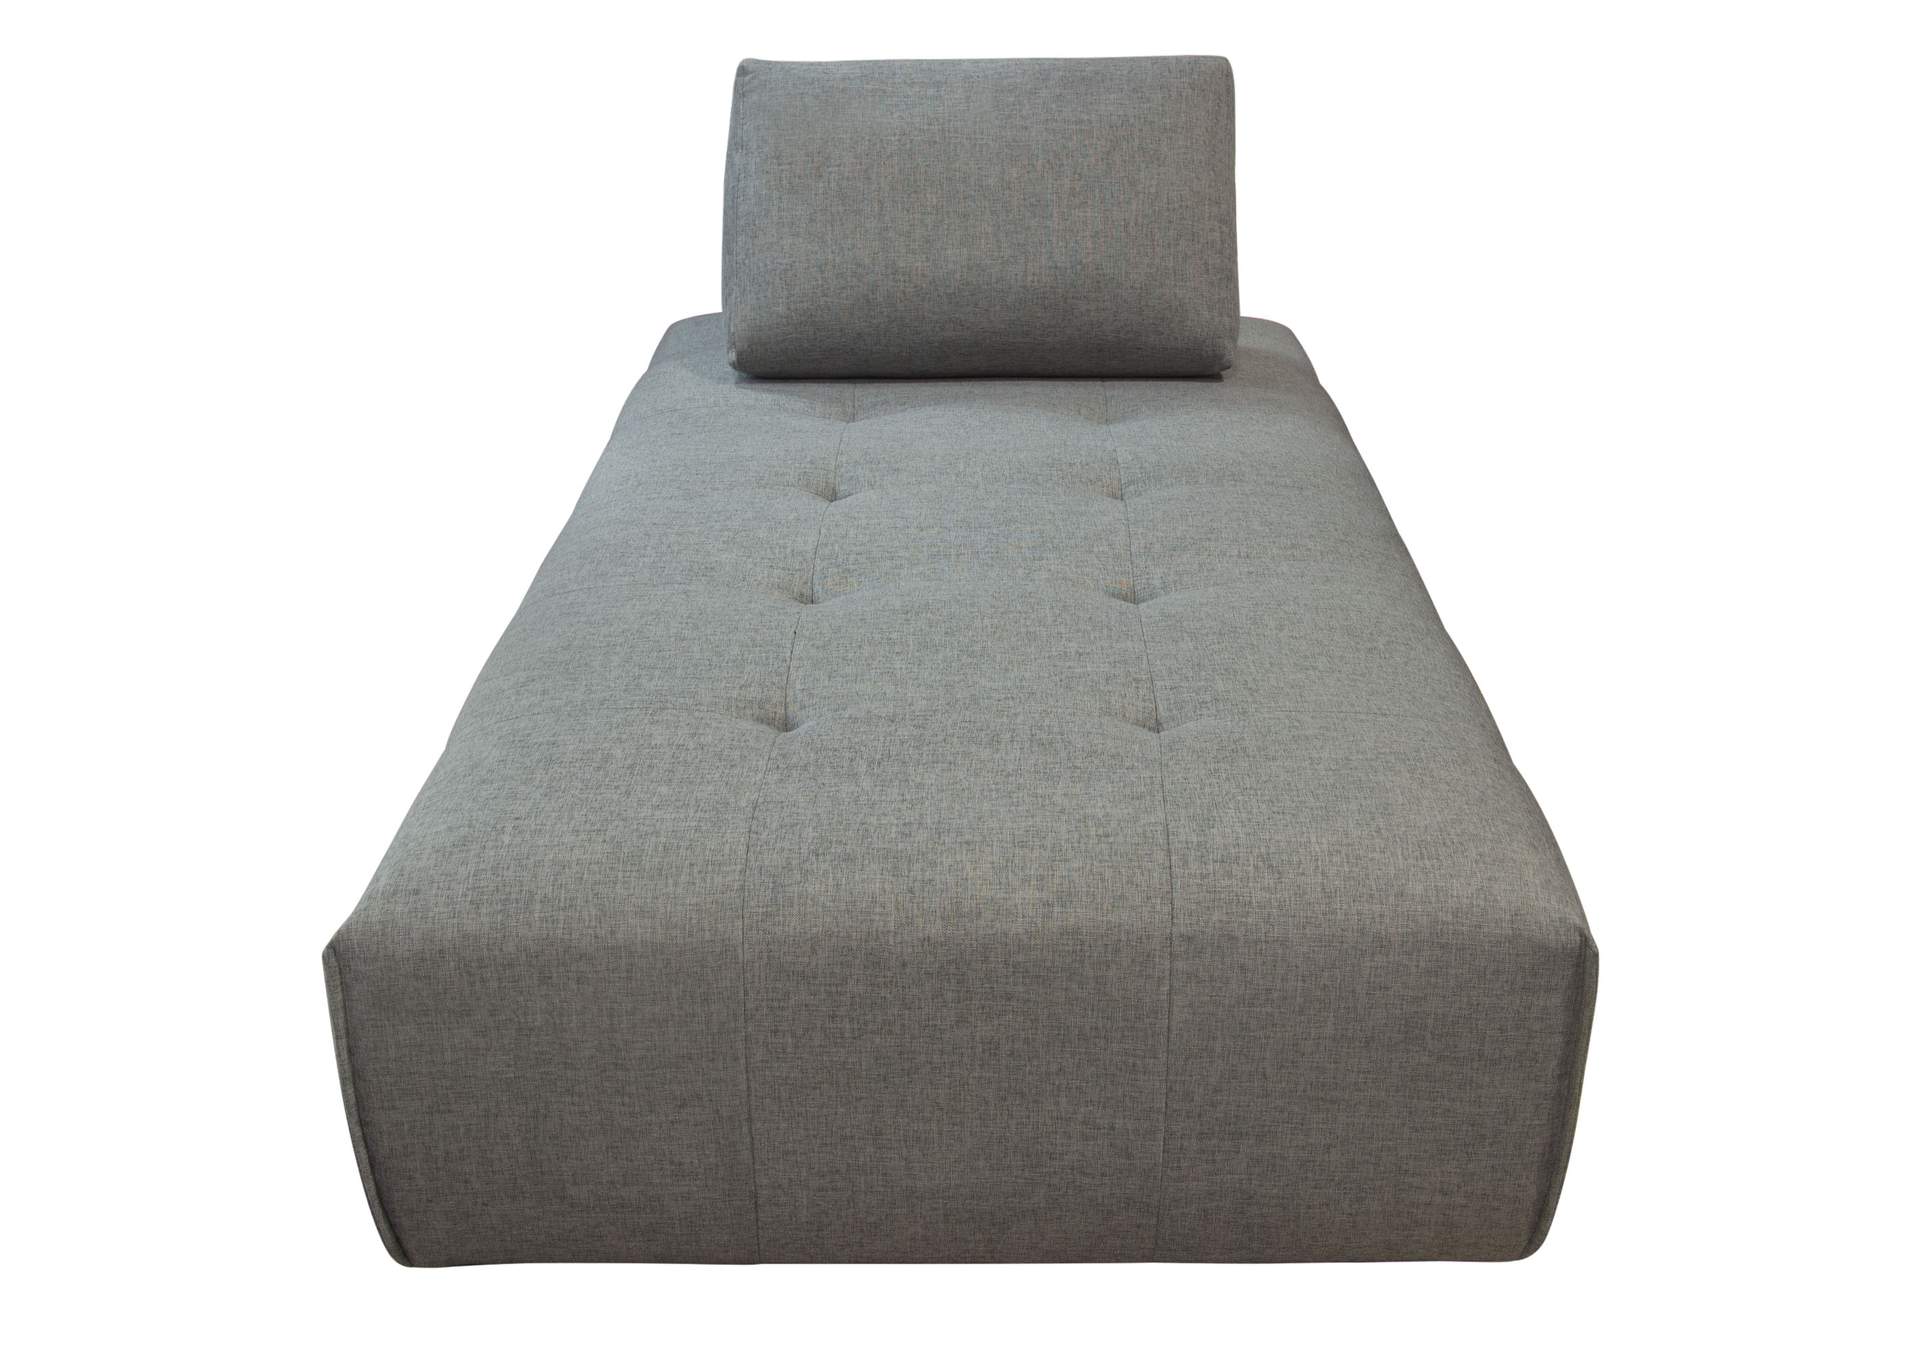 Cloud Lounge Seating Platform with Moveable Backrest Supports in Space Grey Fabric by Diamond Sofa,Diamond Sofa